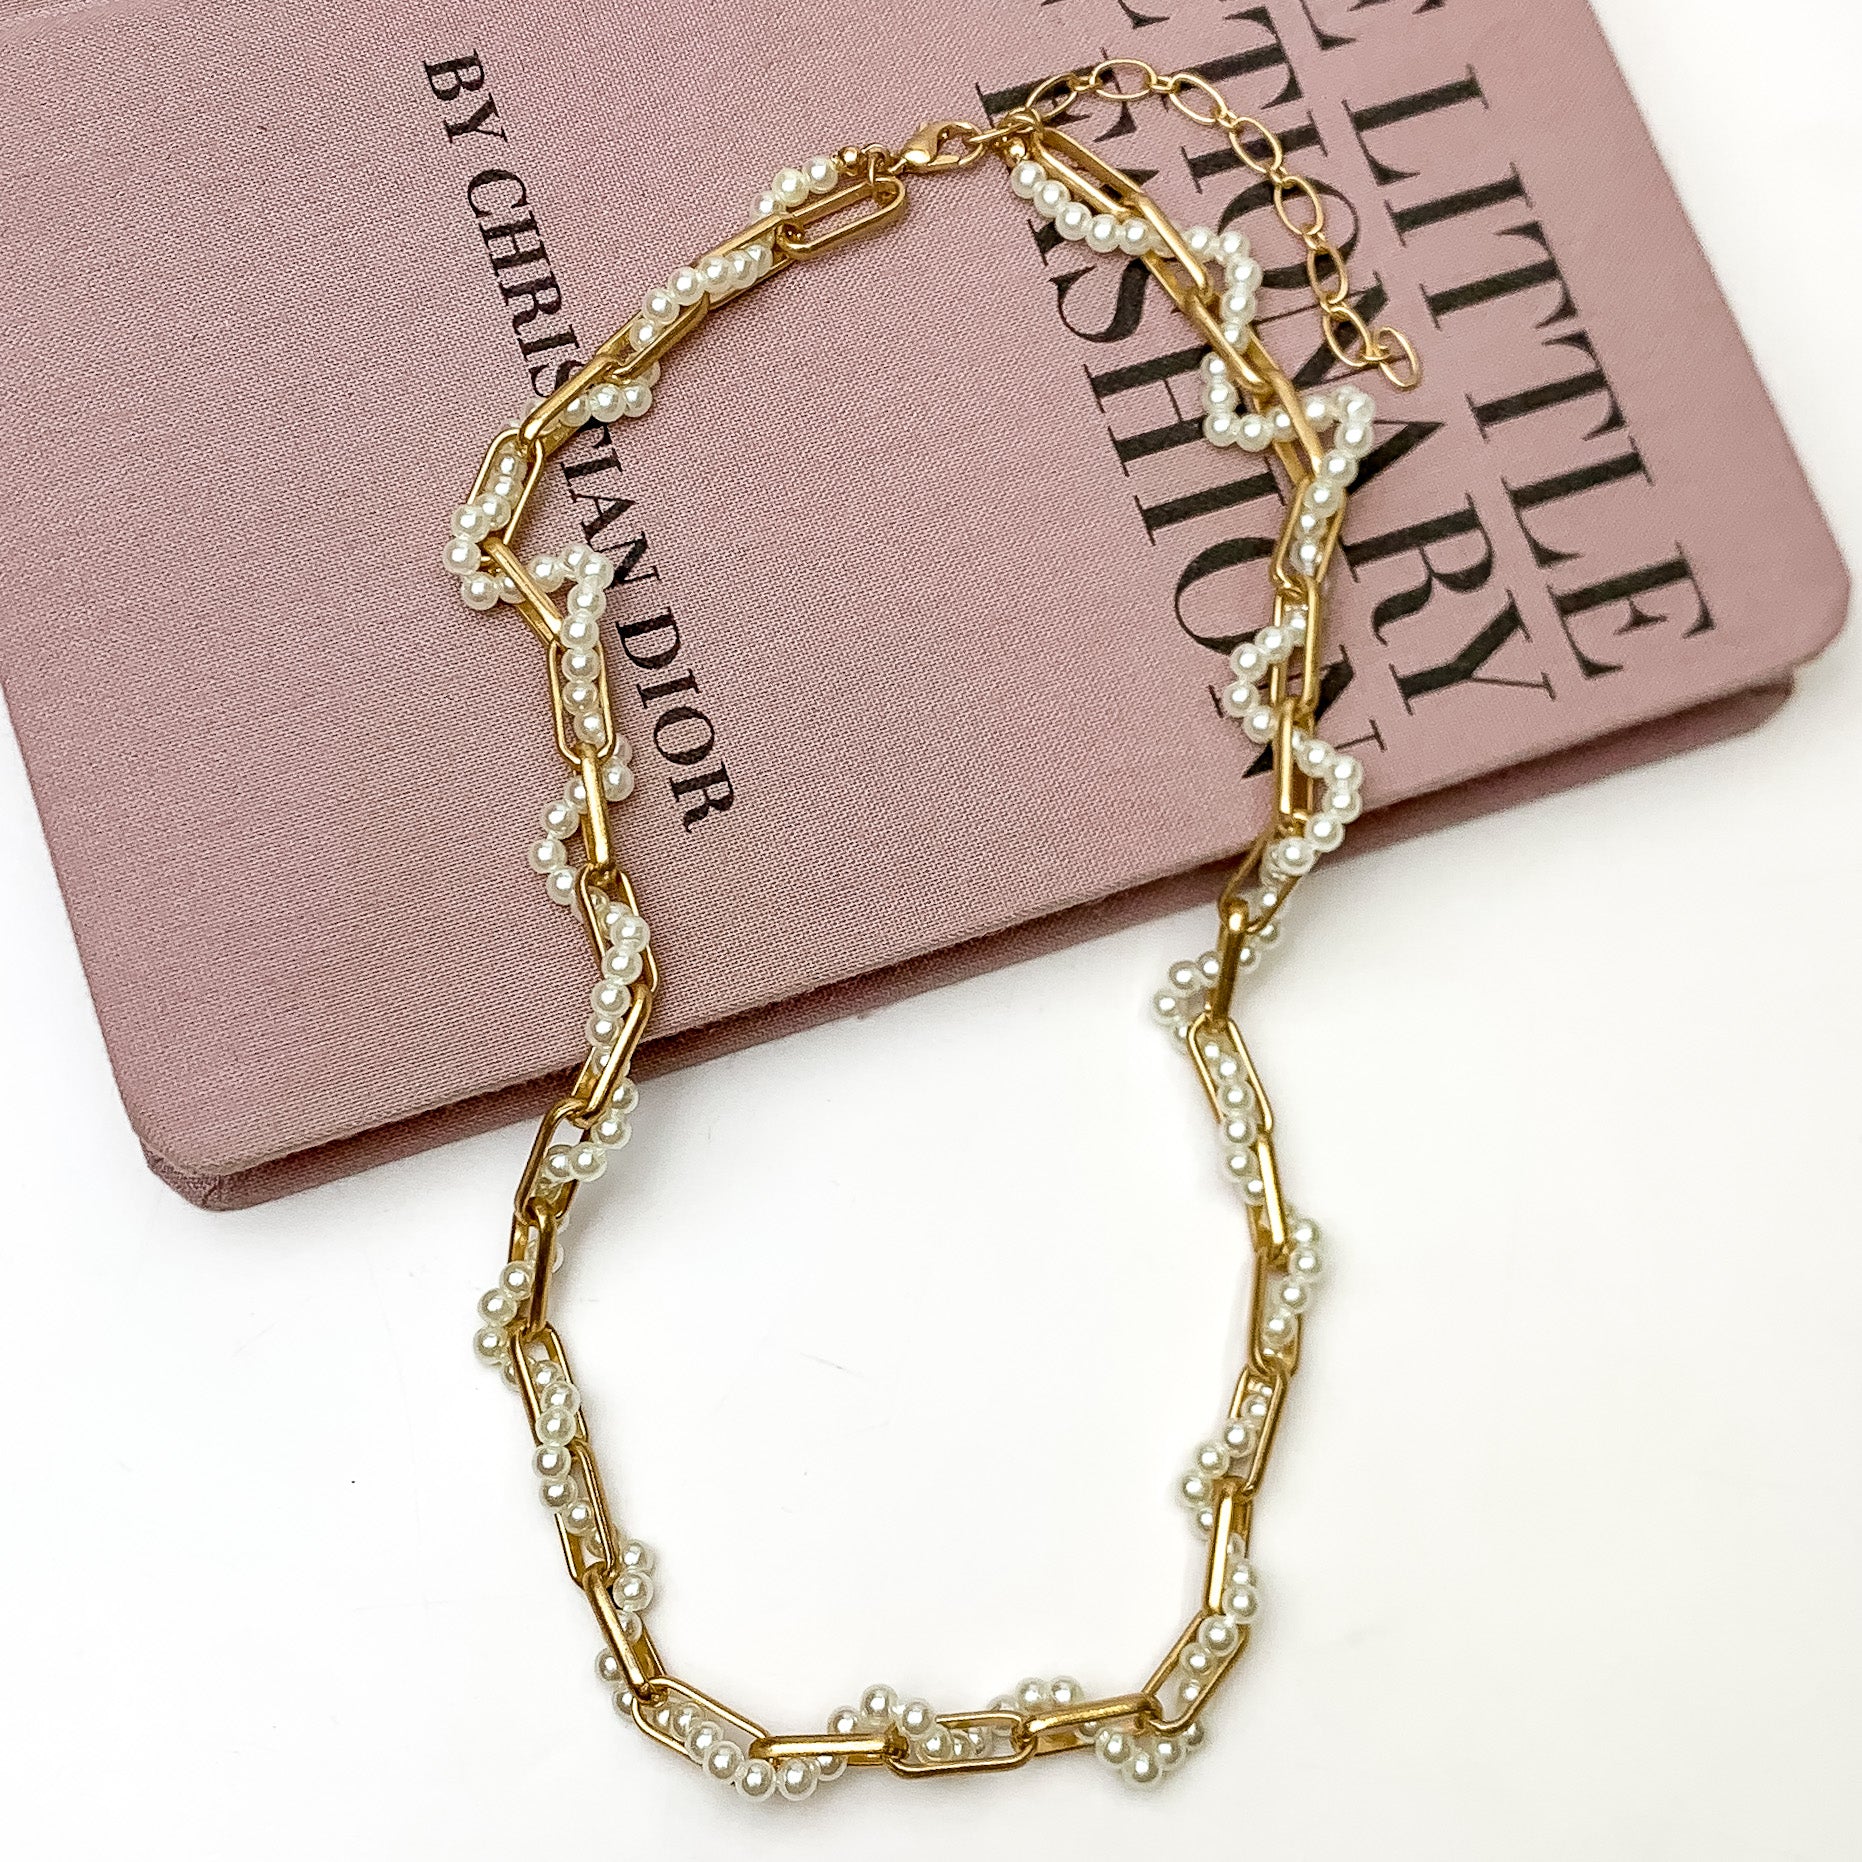 Pictured is a gold chain necklace with a white beaded strand woven through the chain. This necklace is pictured laying partially on a mauve book on a white background.  